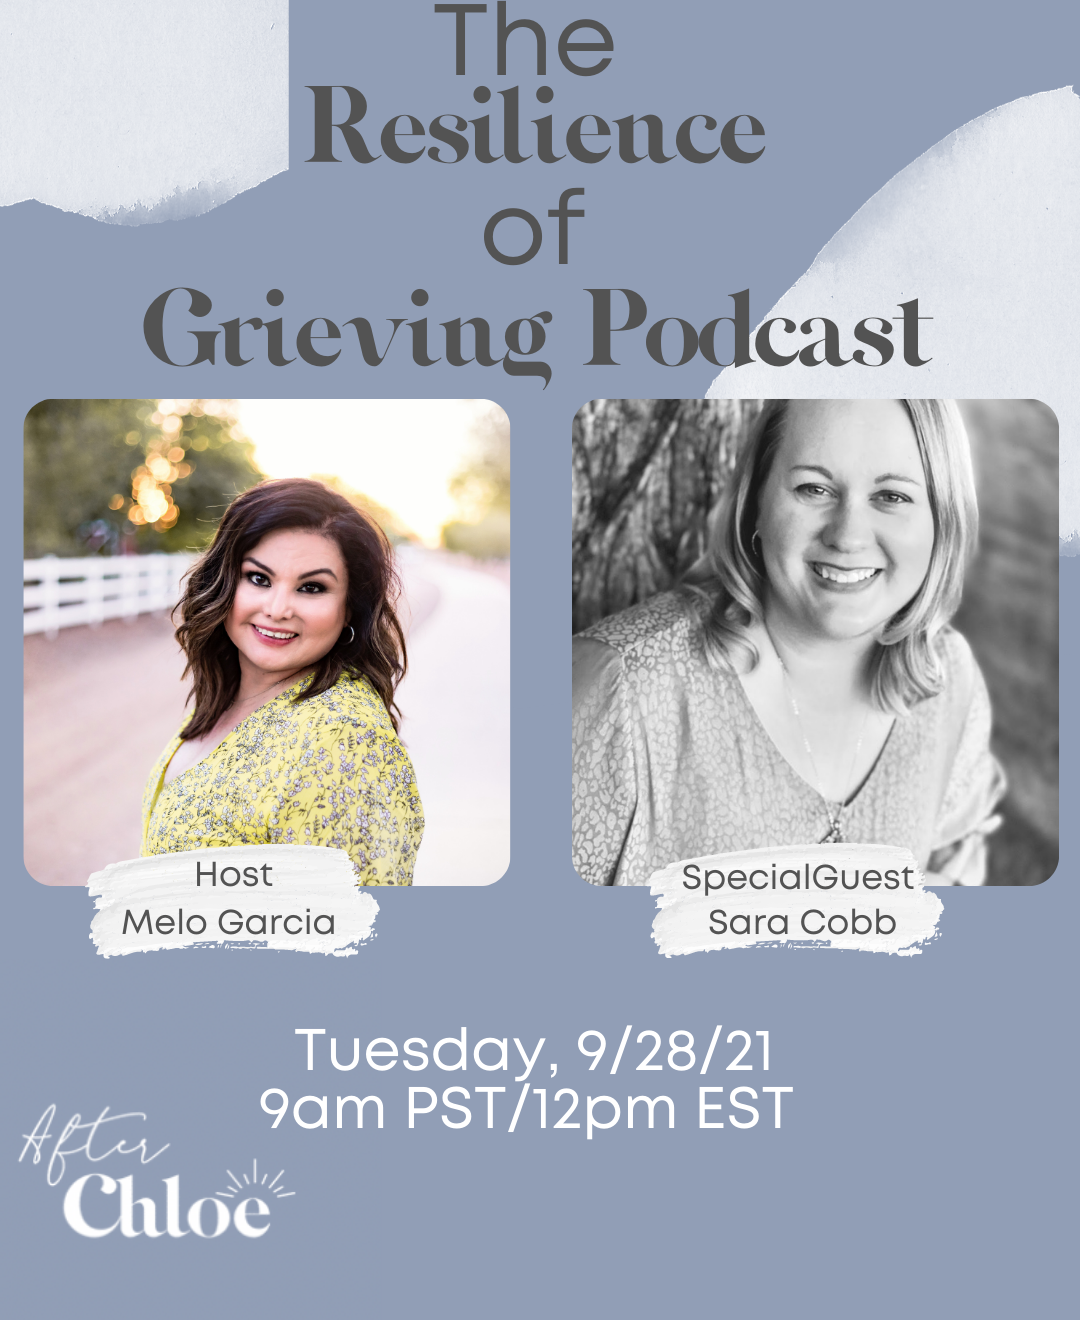 The Resilience of Grieving Podcast with host Melo Garcia and Sara Cobb of My Grief Connection